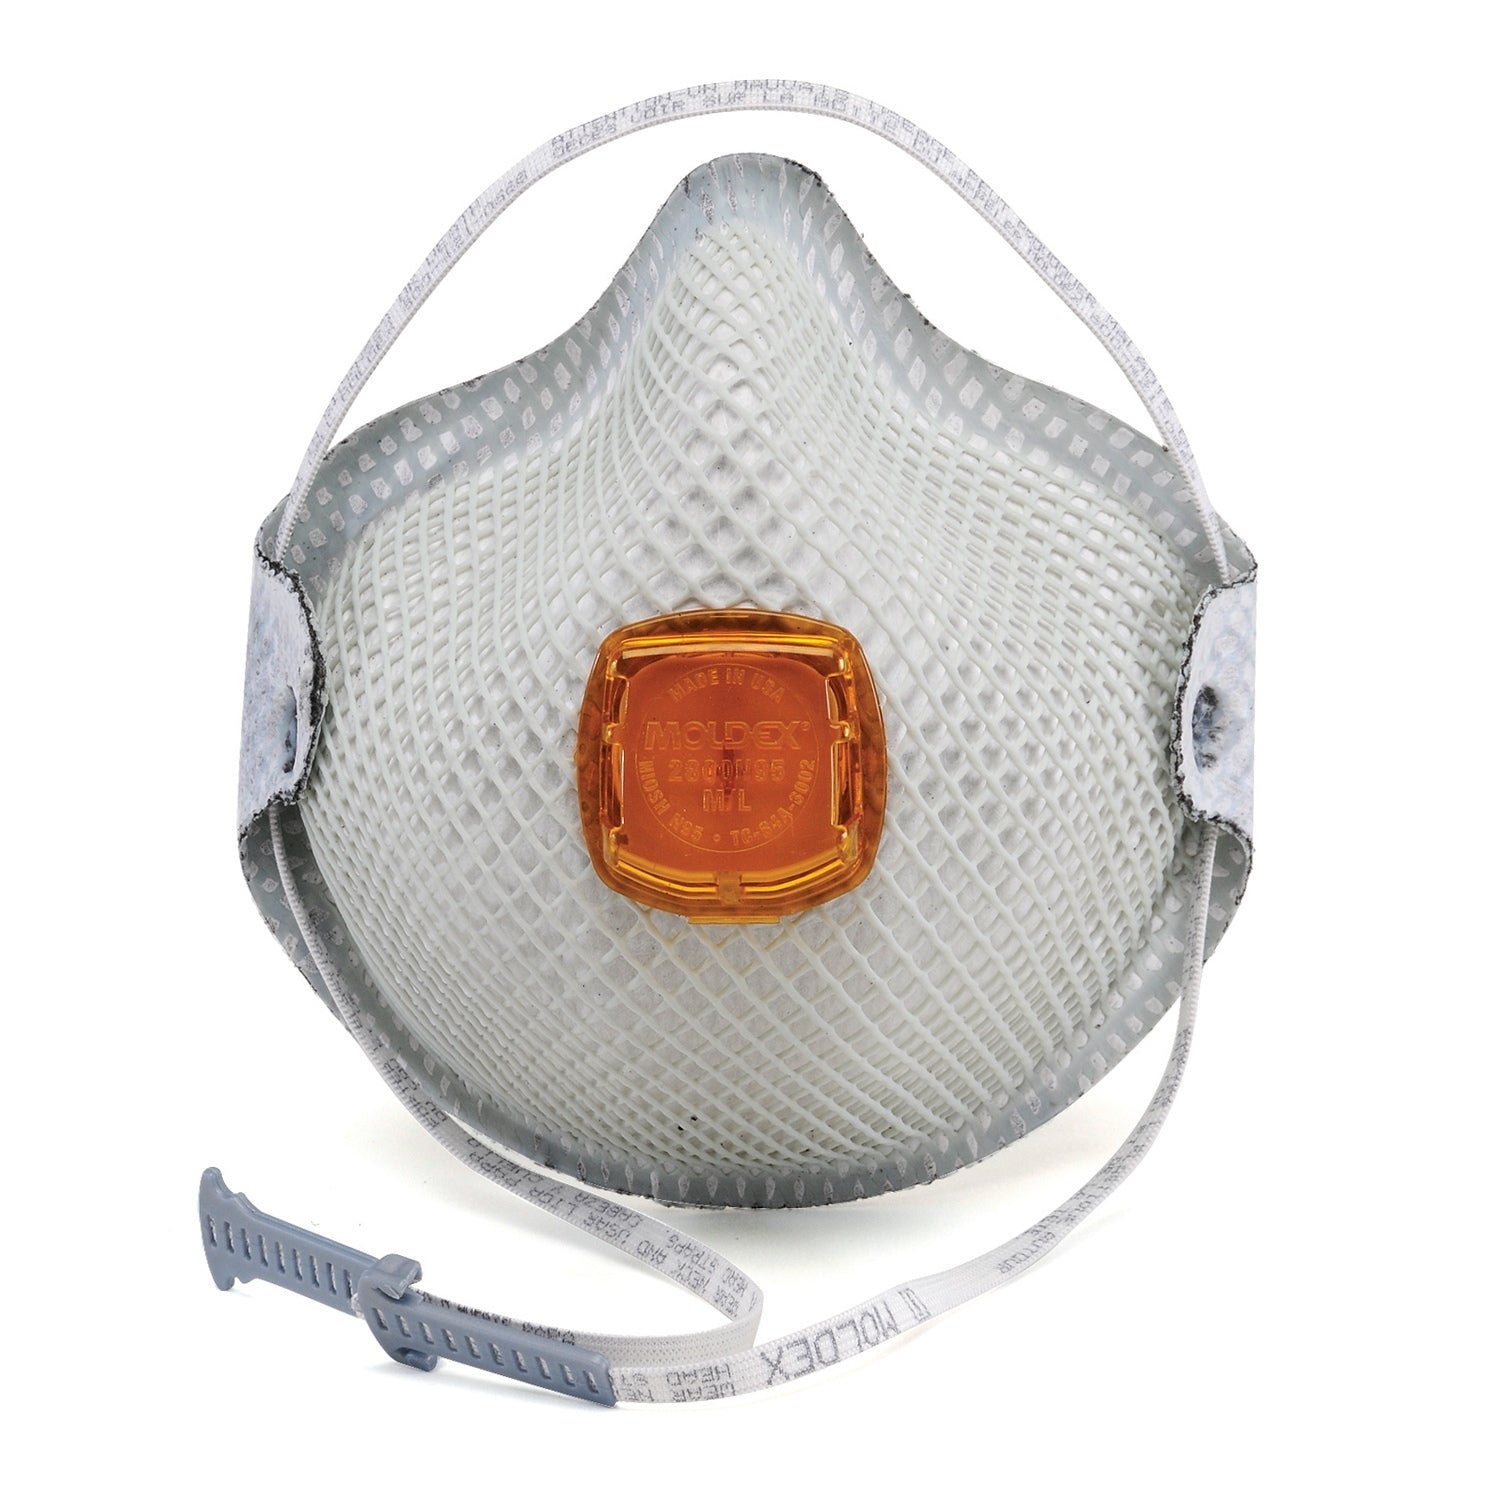 MOLDEX 2800N95 - Plus Relief From Organic Vapors Series Particulate Respirators With HandyStrap® & Ventex® Valve - 10/BOX